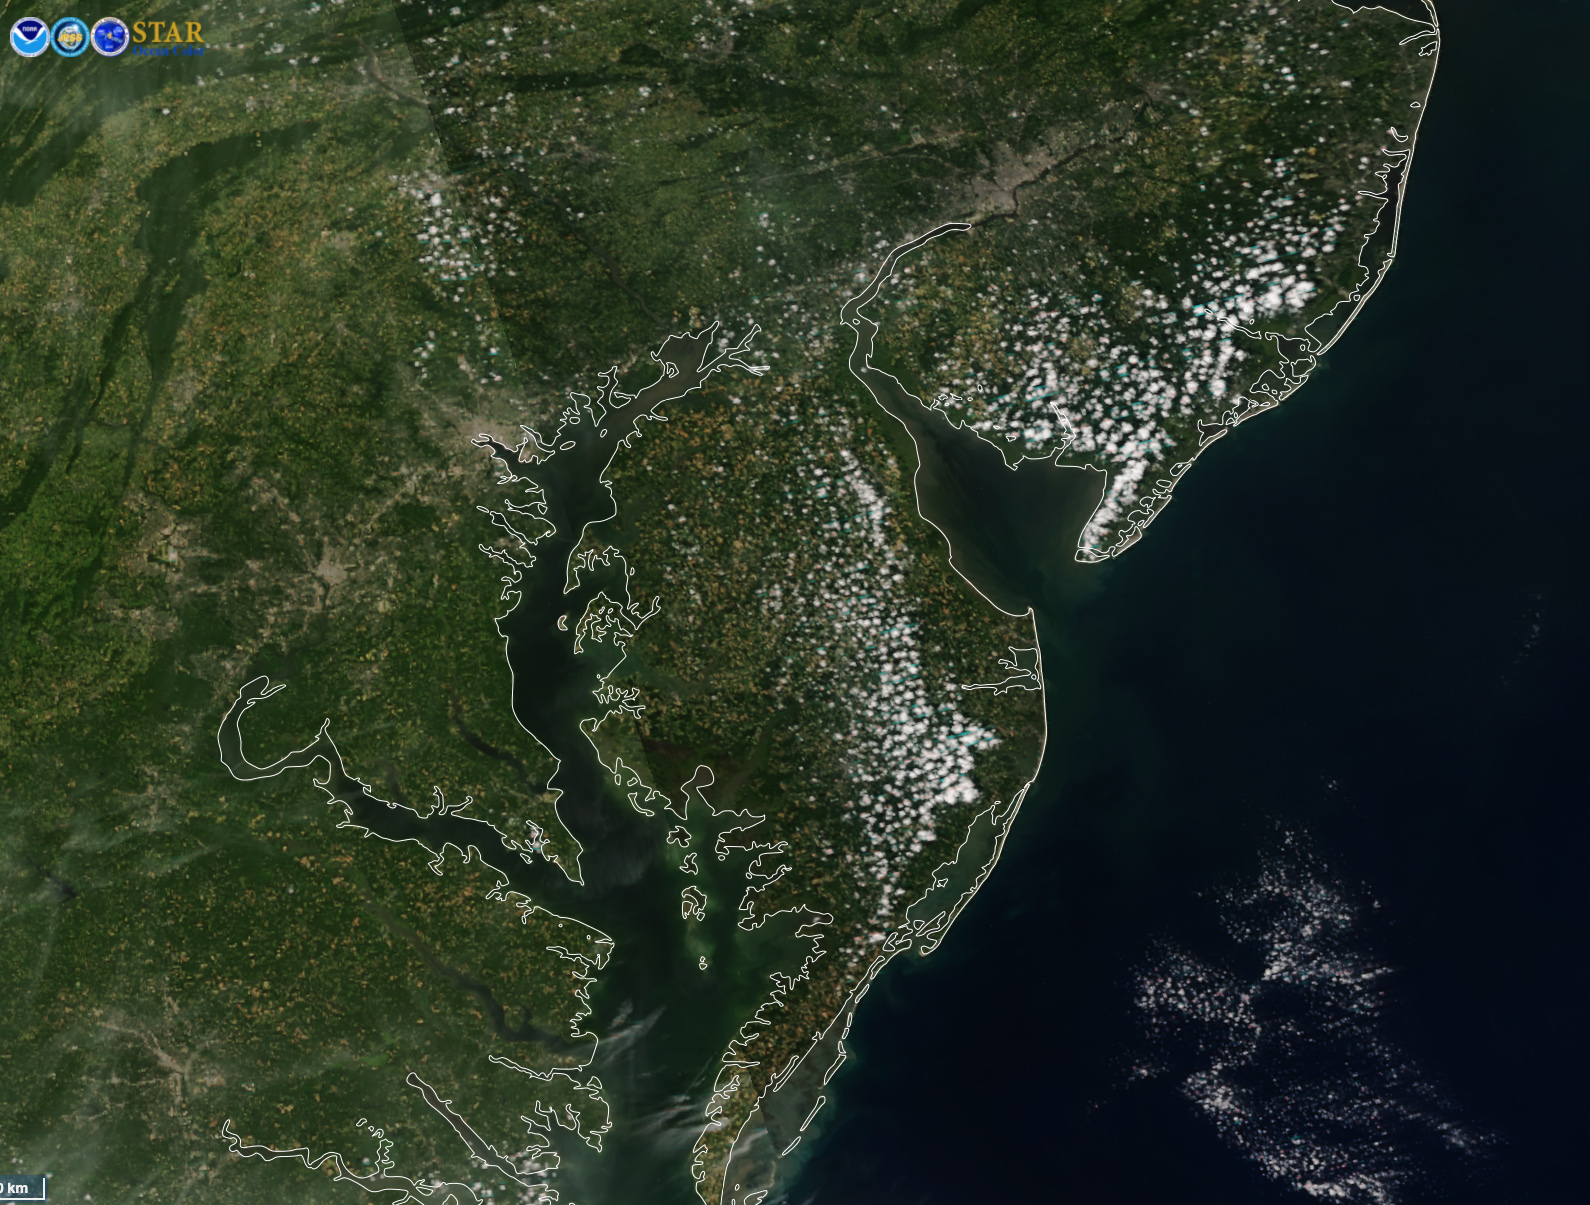 A true-color satellite image of Maryland and Delaware shows discolored water near Delaware, indicating high levels of chlorophyll.